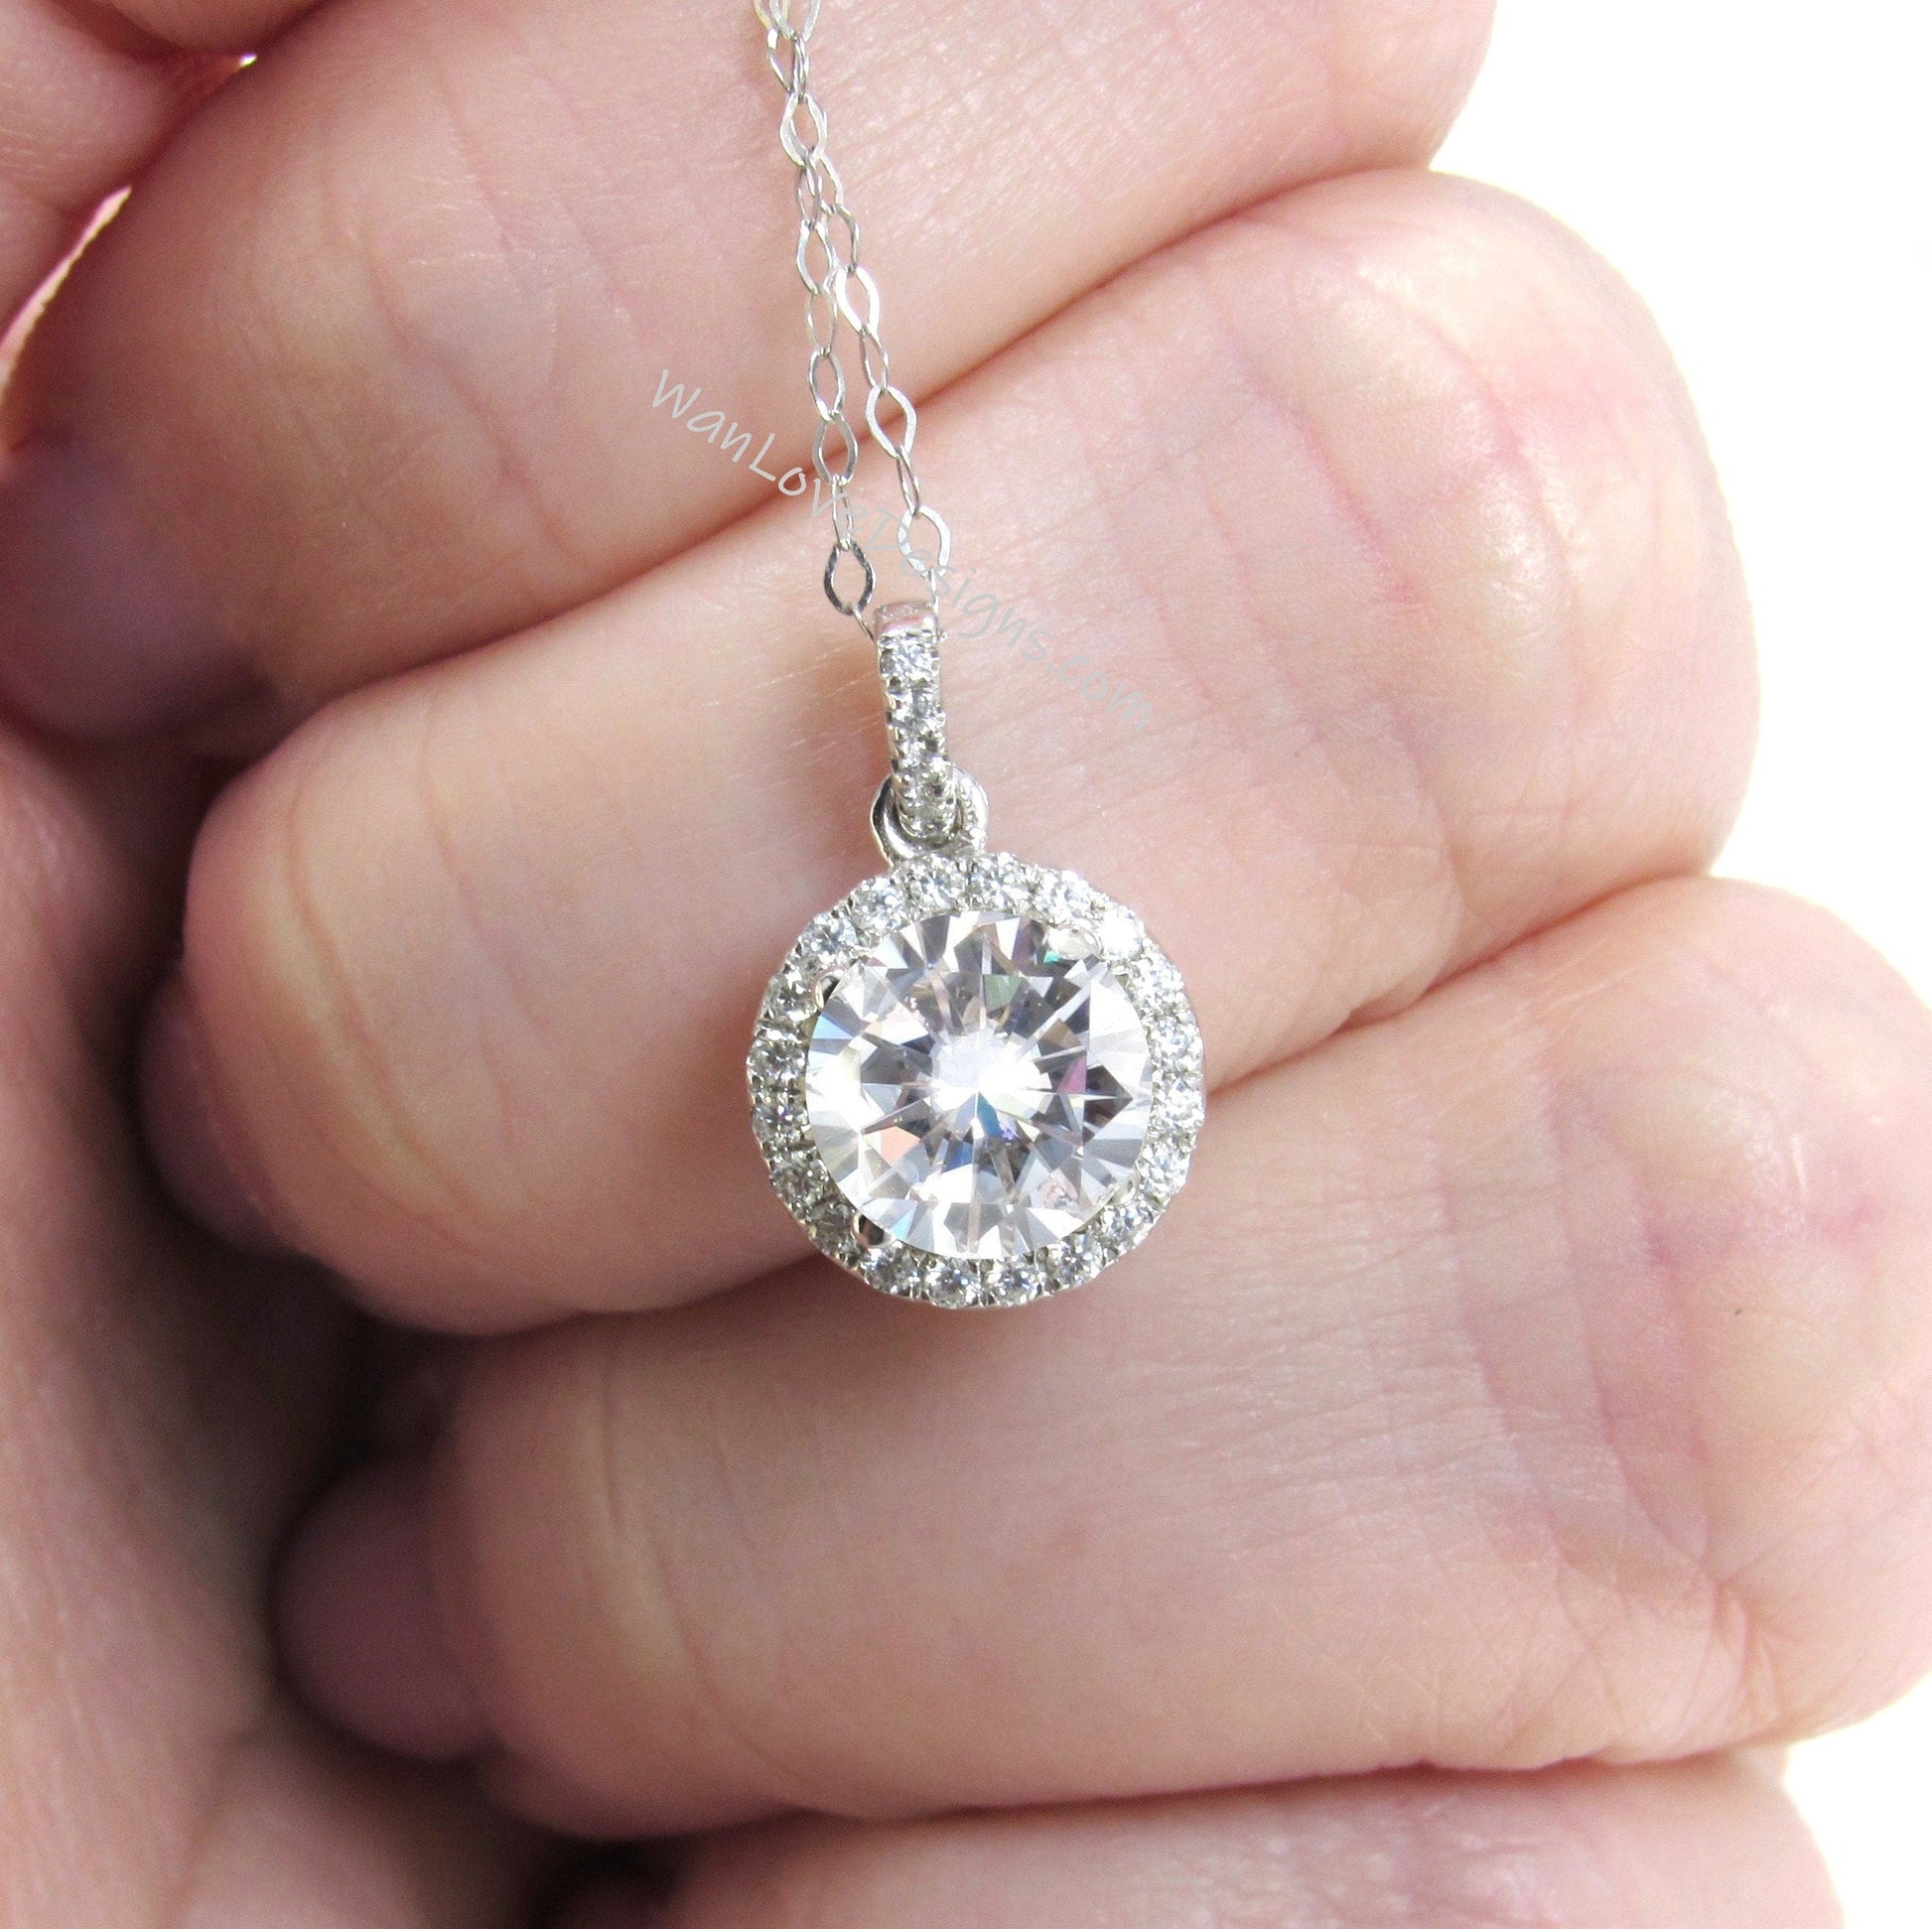 Birthstone Round Halo Necklace - 14k, 18k Yellow, Rose, White Gold or Platinum. Fully Customizable. Fine Jewelry Made to Order in GA Wan Love Designs